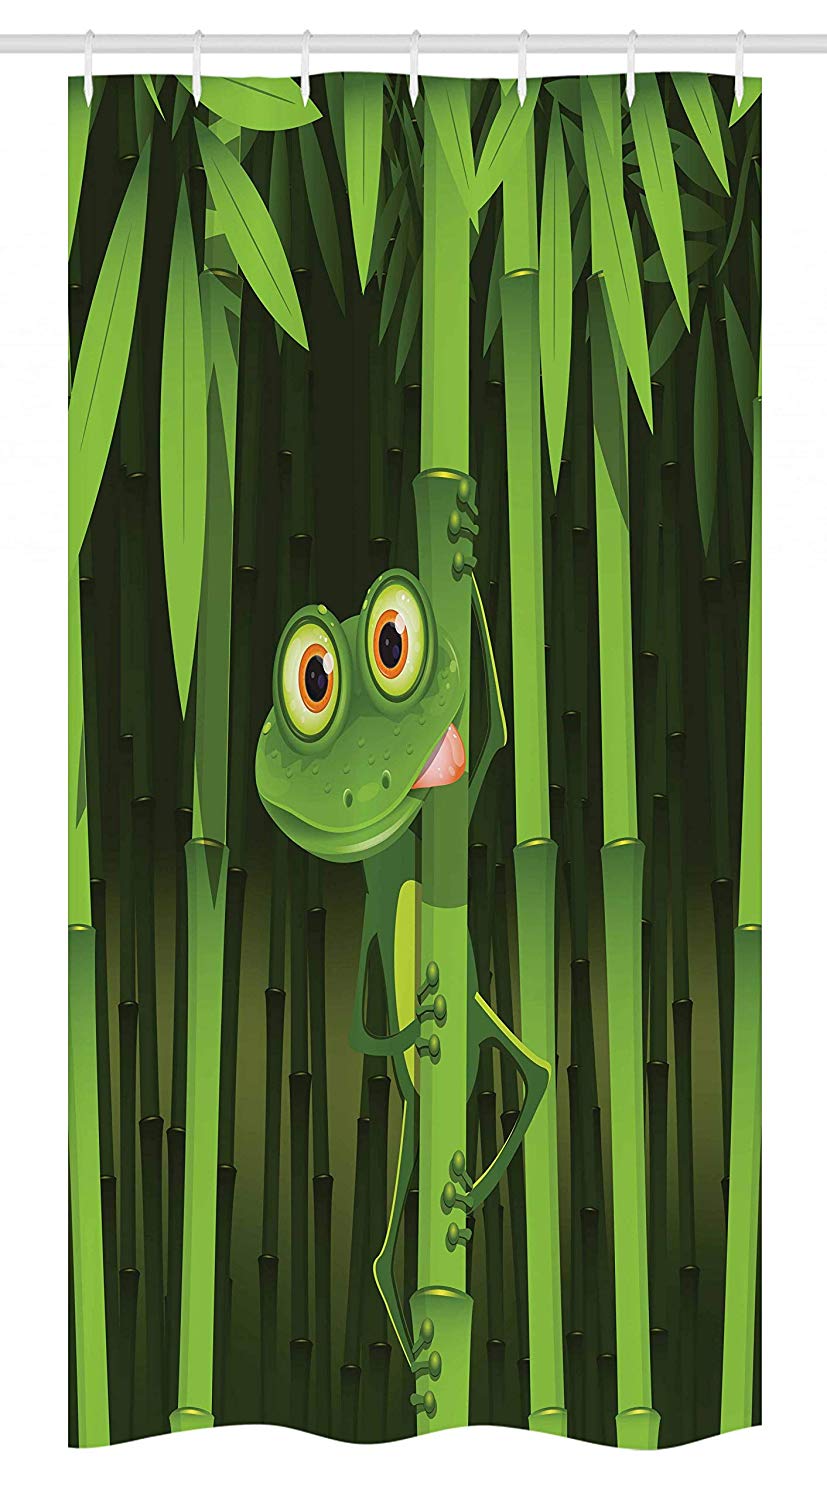 Ambesonne Animal Stall Shower Curtain, Funny Illustration of Friendly Fun Frog on Stem of The Bamboo Jungle Trees Nature, Fabric Bathroom Decor Set with Hooks, 36